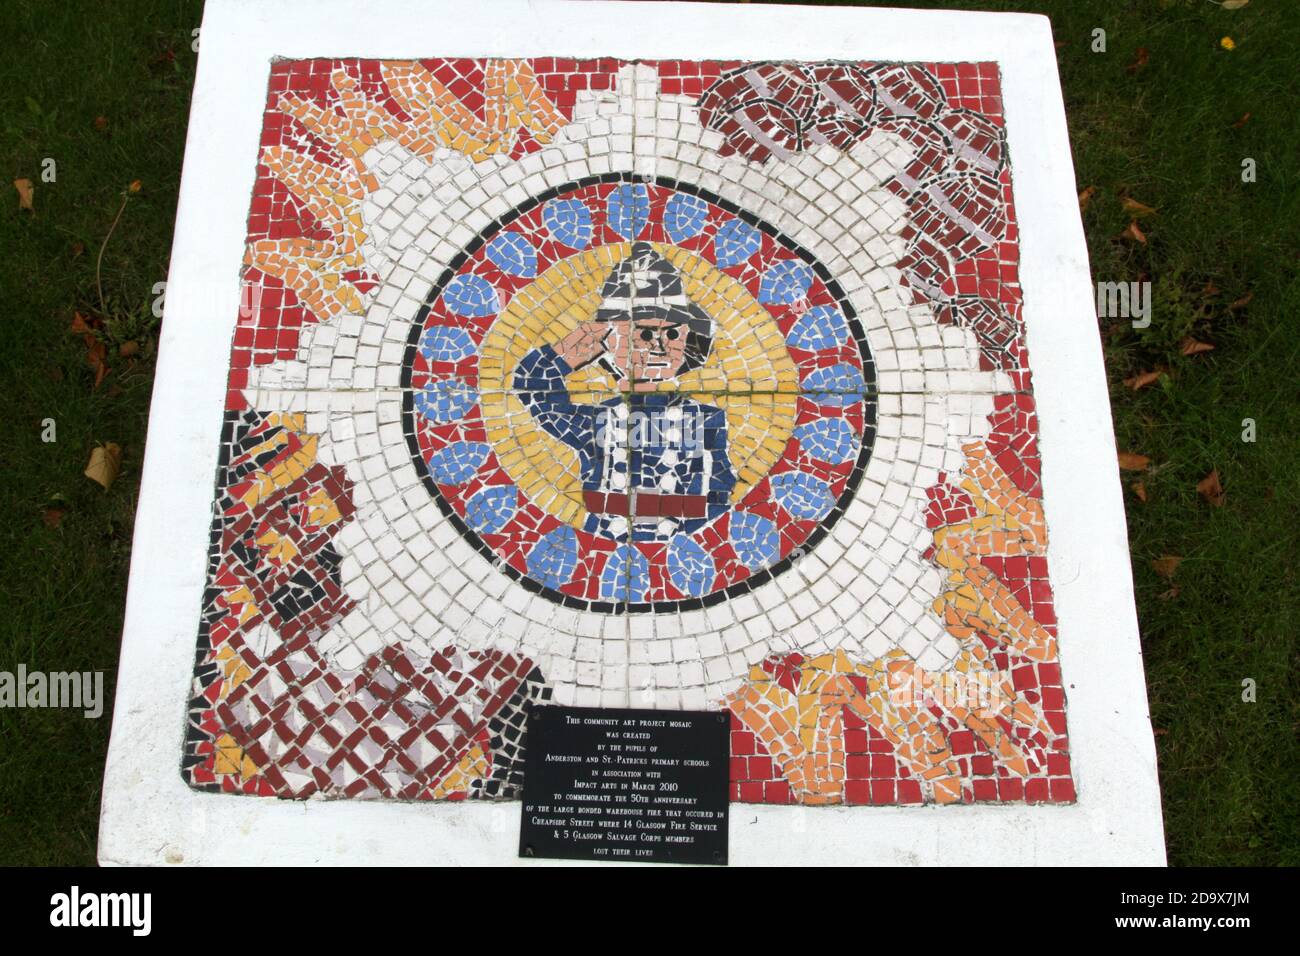 Cheapside Glasgow, Scotland.  Mosaic commemorating fire at Cheapside where 14 firefighters and 5 Salvage corp members lost thier life The Cheapside Street whisky bond fire in Glasgow on 28 March 1960 was Britain's worst peacetime fire services disaster. The fire at a whisky bond killed 14 fire service and 5 salvage corps personnel. The mosaic mural, created by the pupils of nearby Anderston & St. Patricks primary Stock Photo